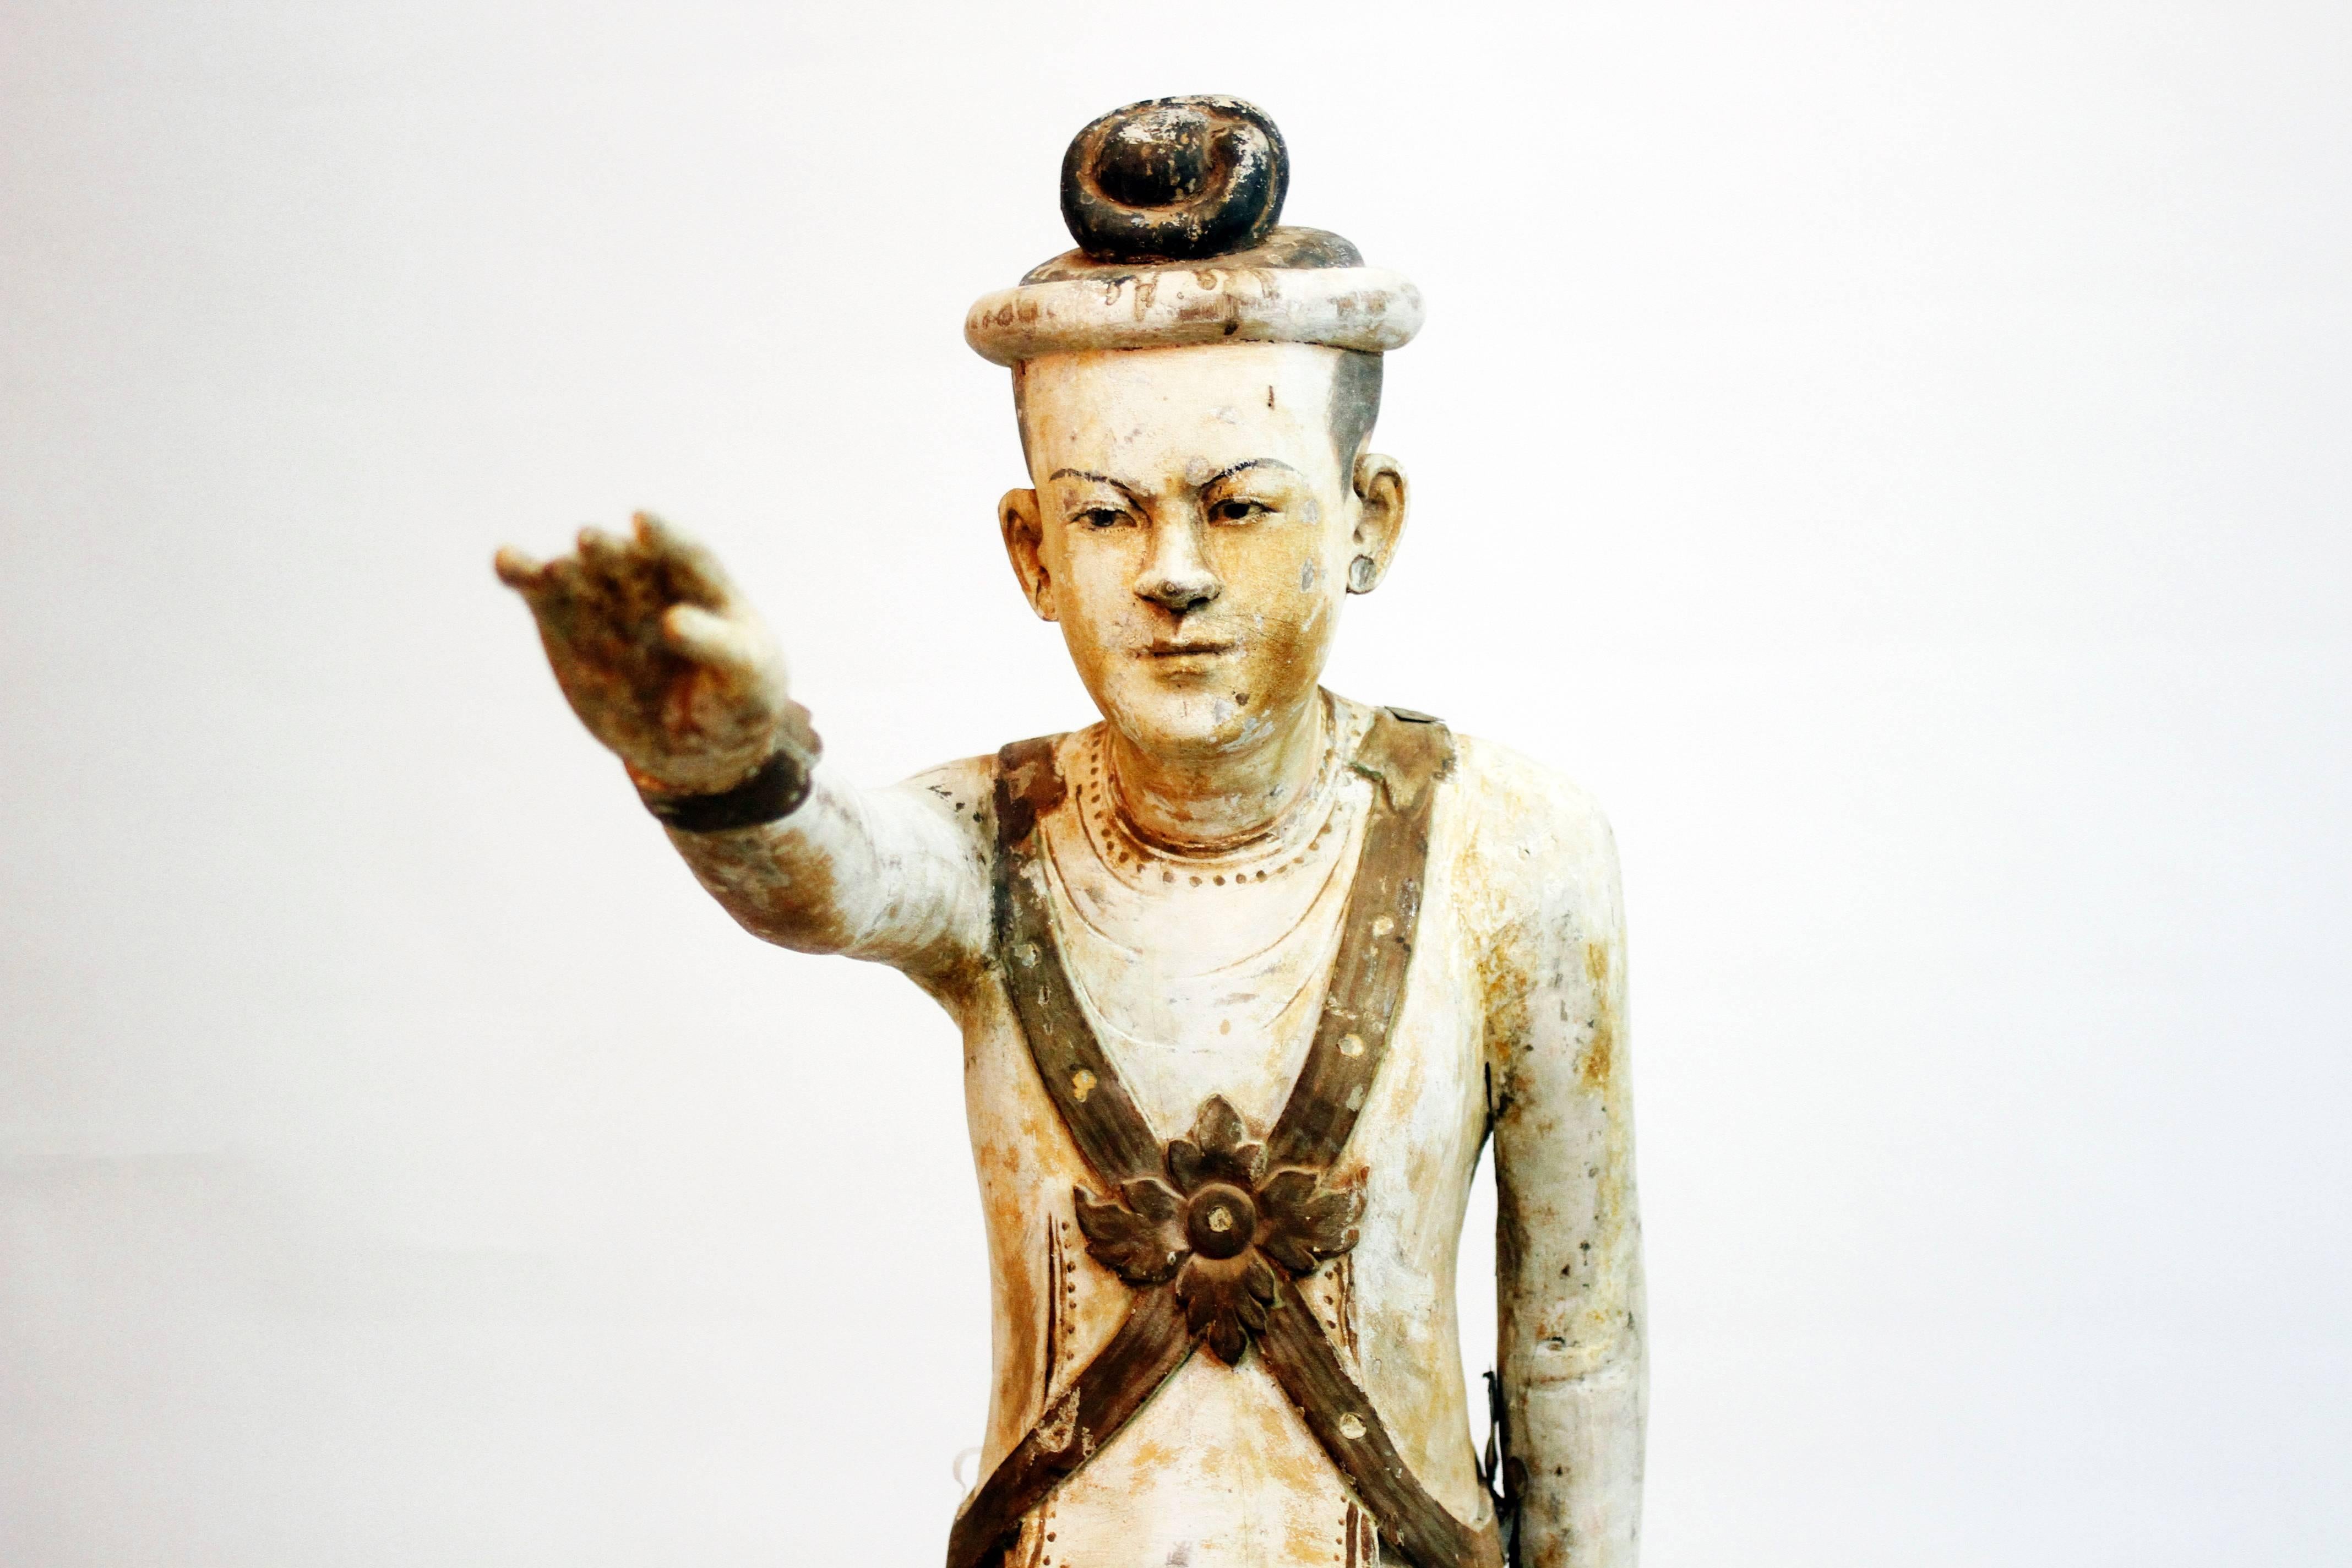 19th Century Standing Figure of a Burmese King